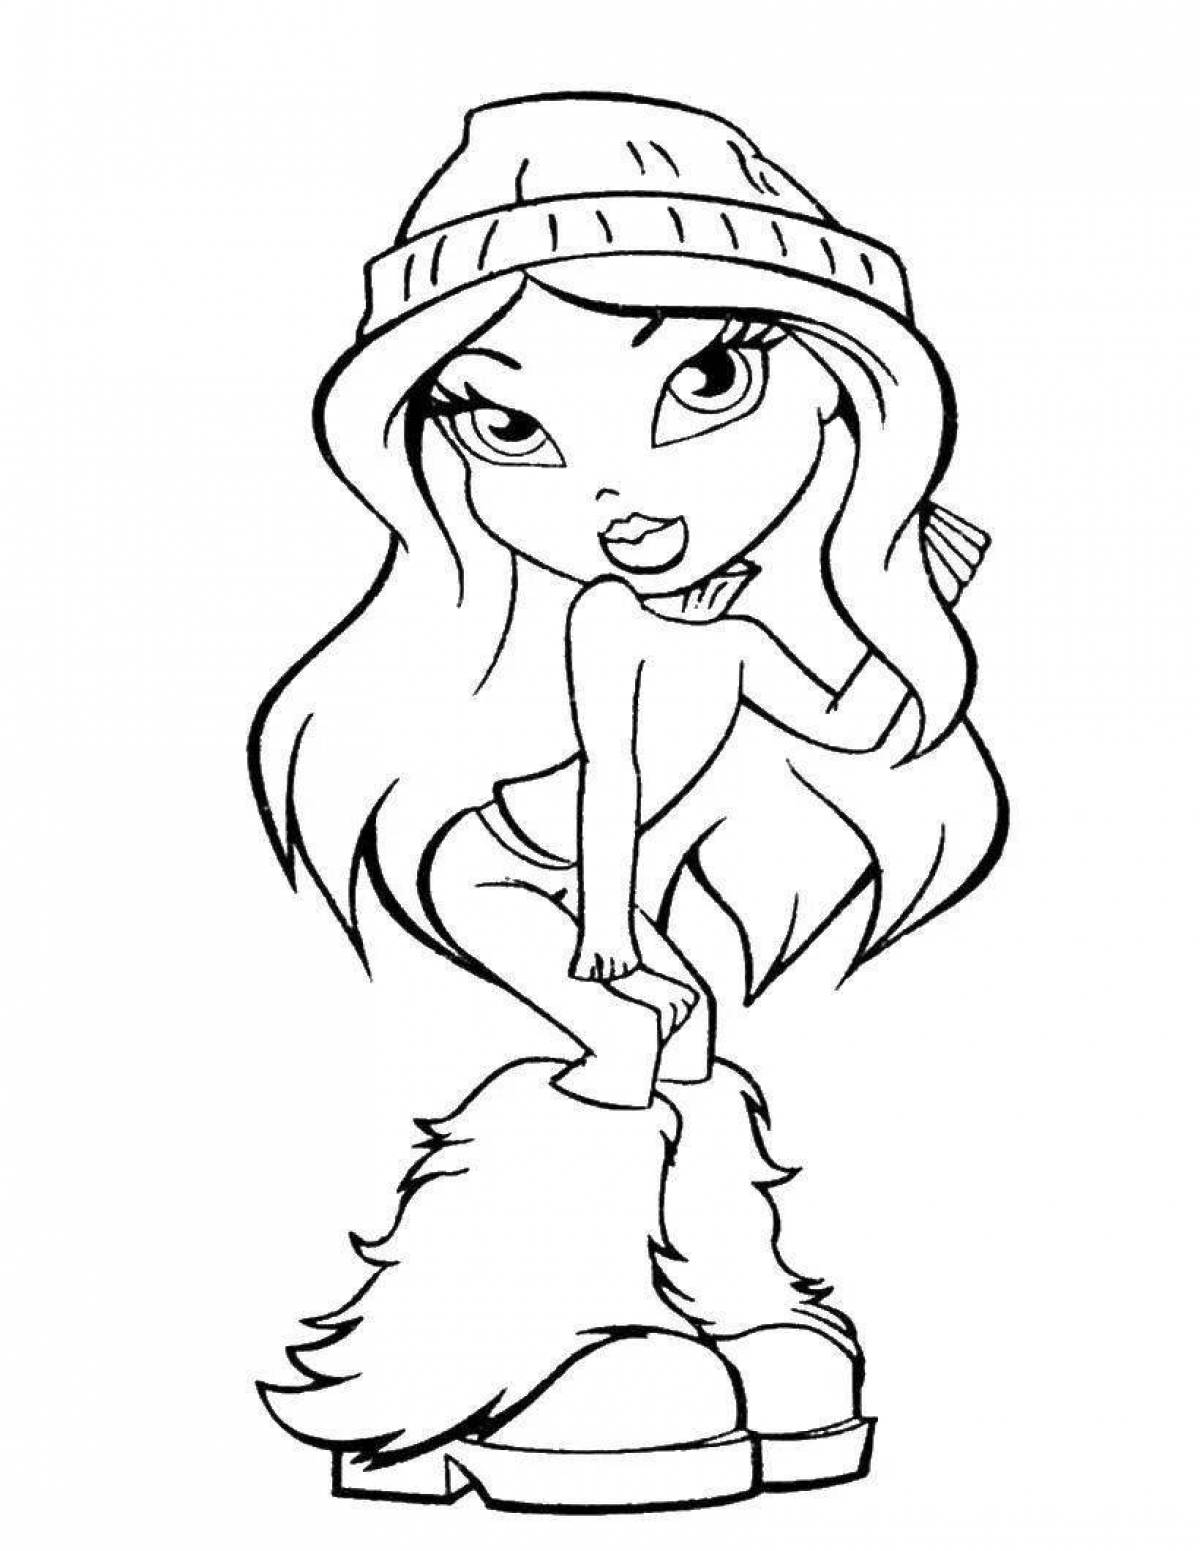 Fancy fashionista coloring page